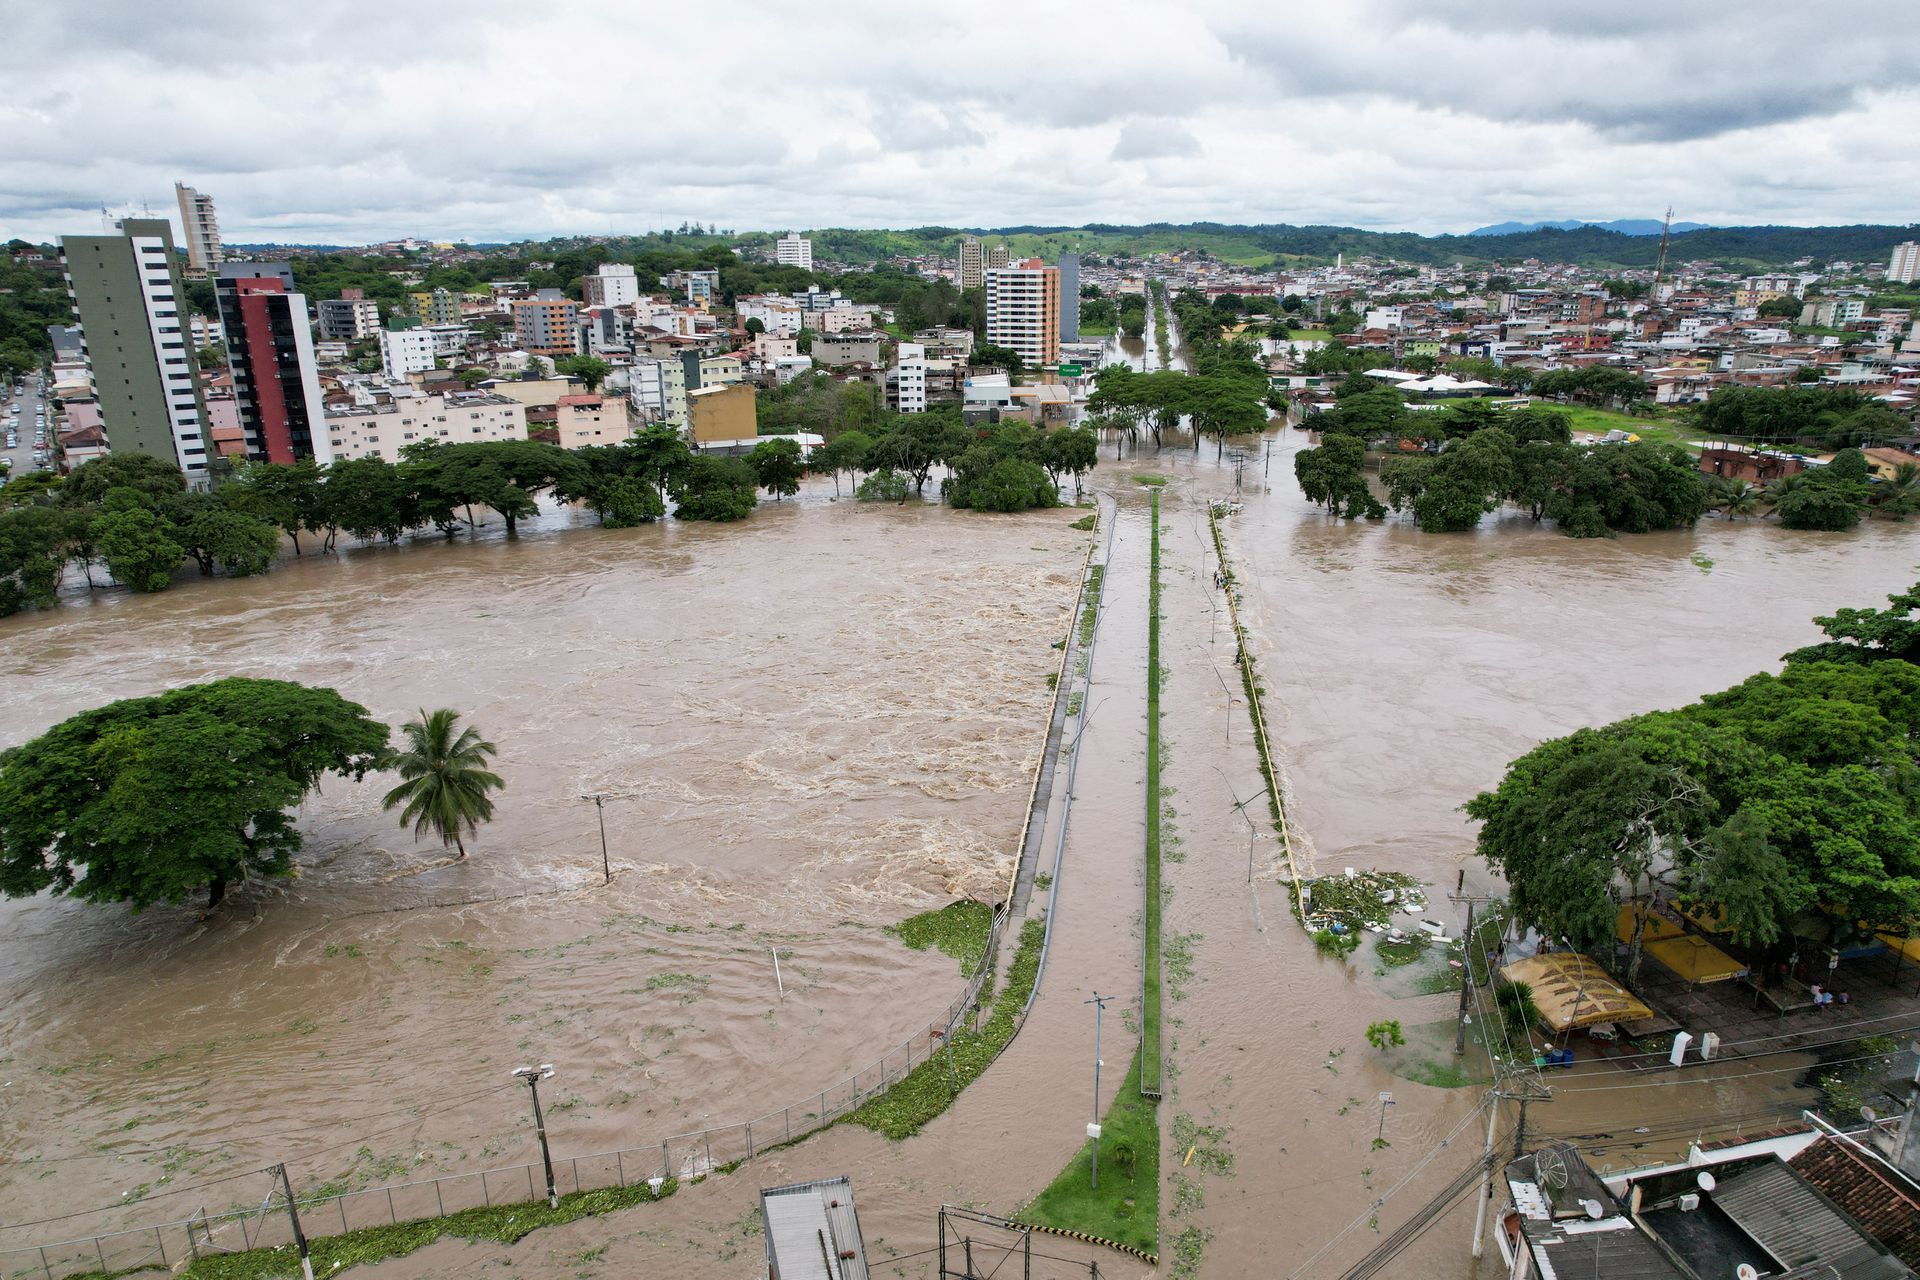 Flooding in Brazil's northeastern state of Bahia has displaced over 11,000 people.